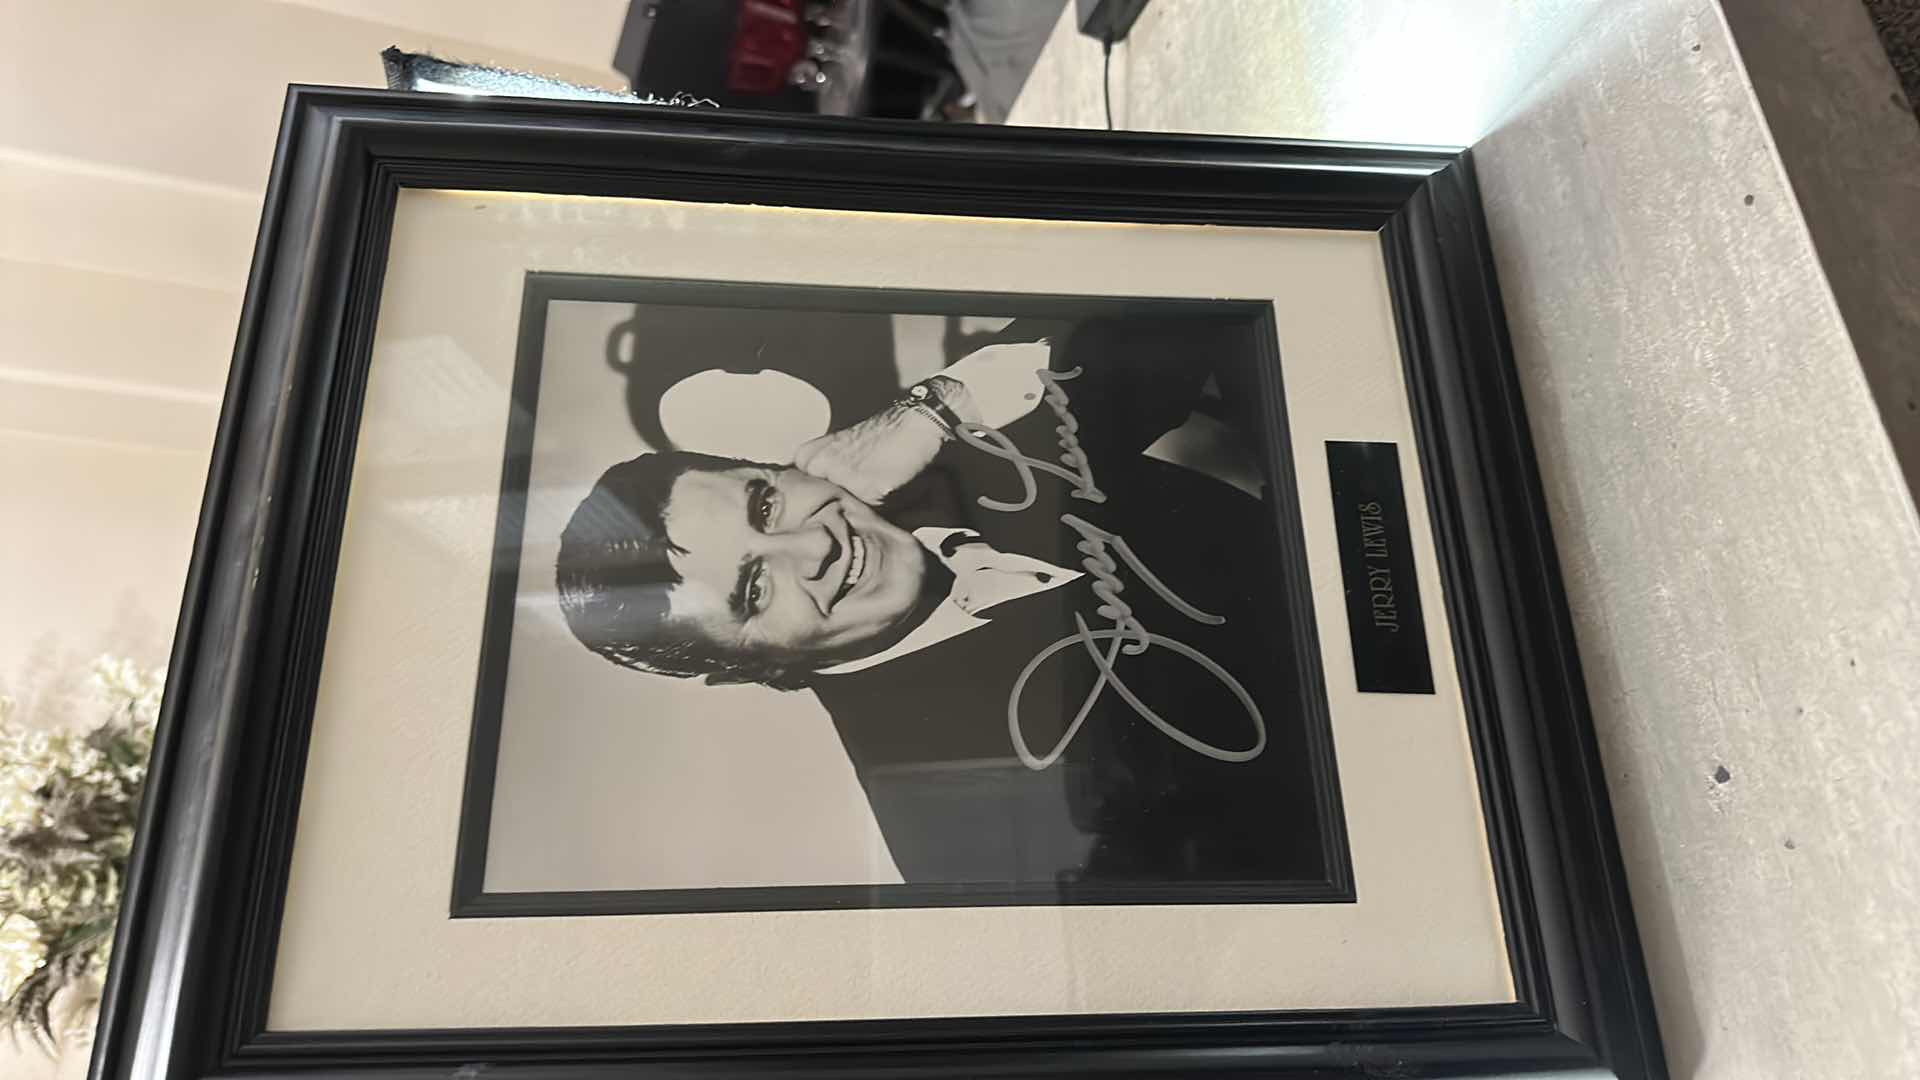 Photo 1 of JERRY LEWIS FRAMED 8”X10” AUTOGRAPHED PHOTO AUTHENTICITY VERIFIED BY SELLER